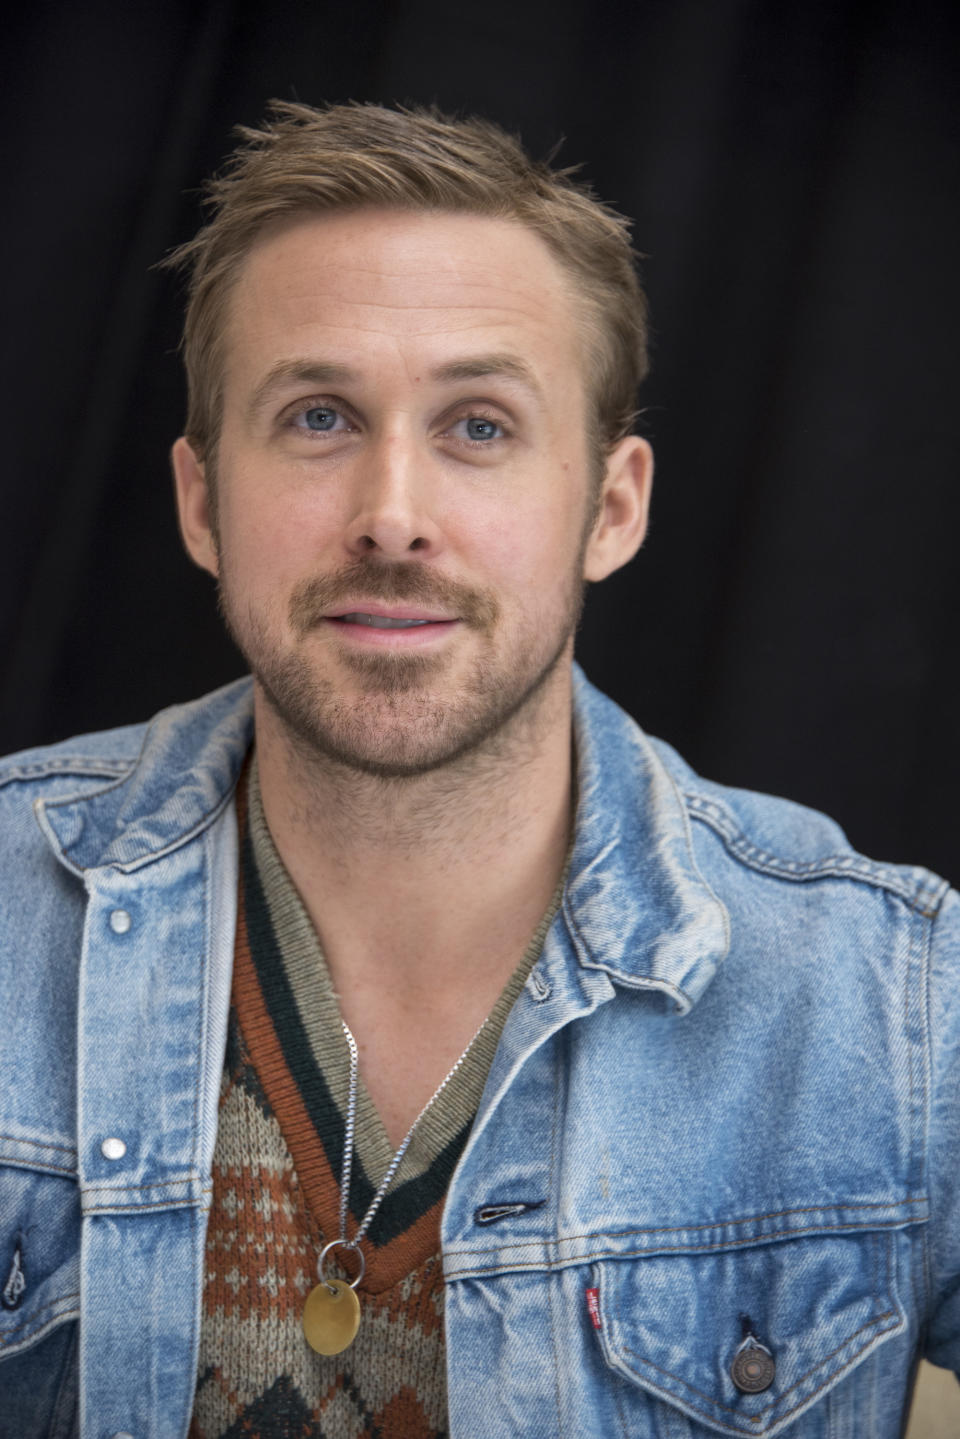 Gosling at the "Blade Runner 2049" press conference in 2017